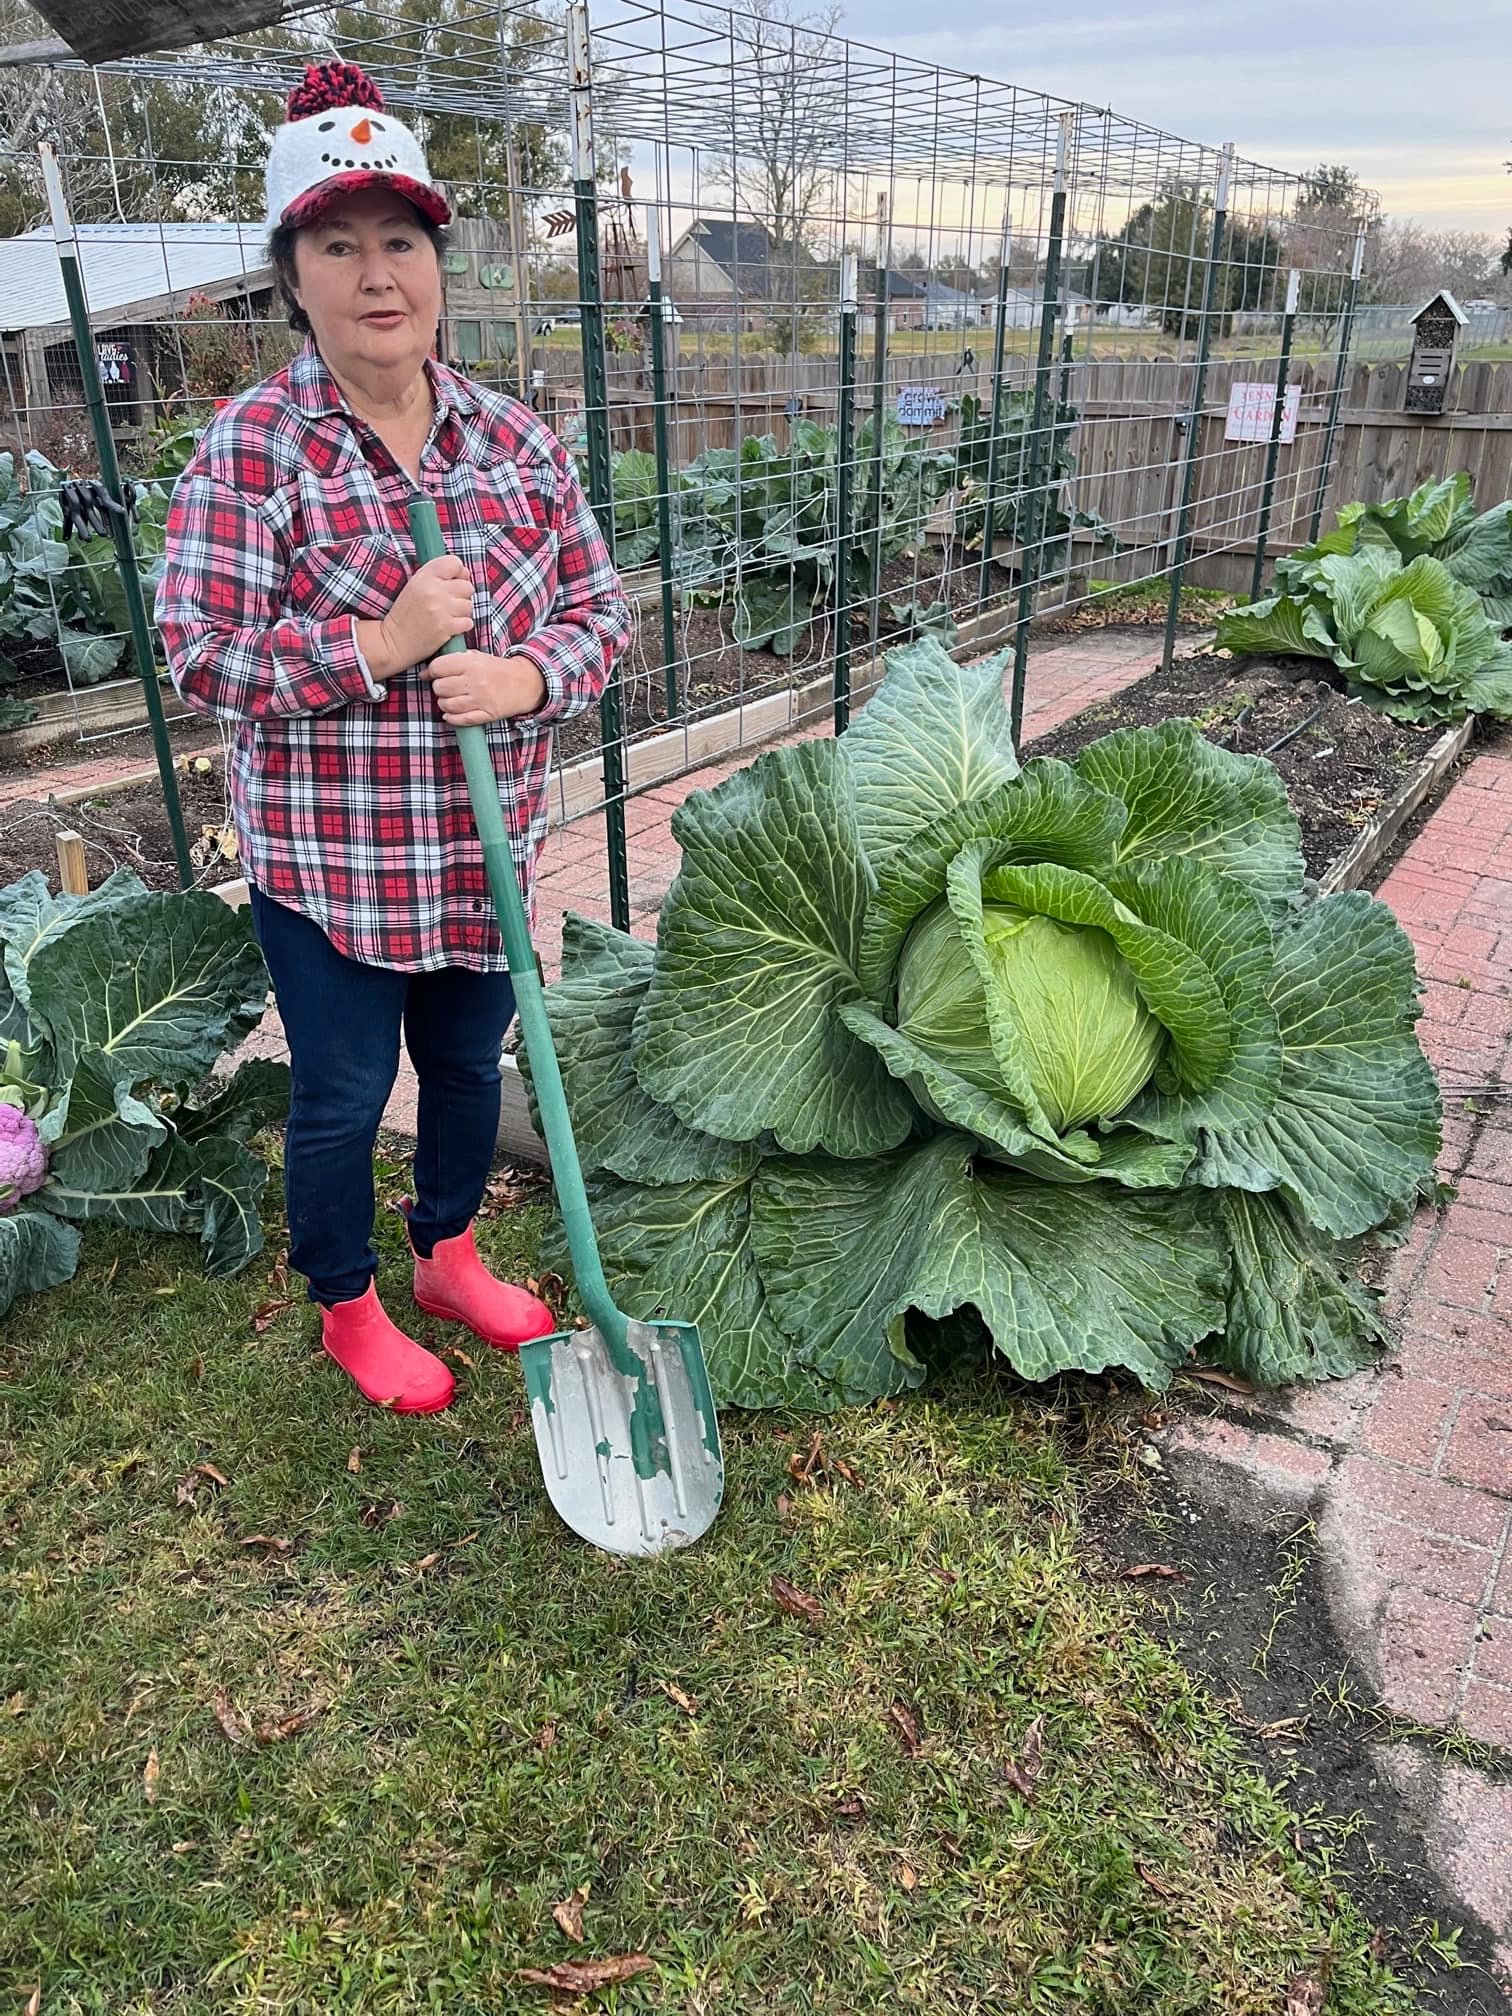 Home Gardener Crowned Champion with Massive 44-Pound Cabbage